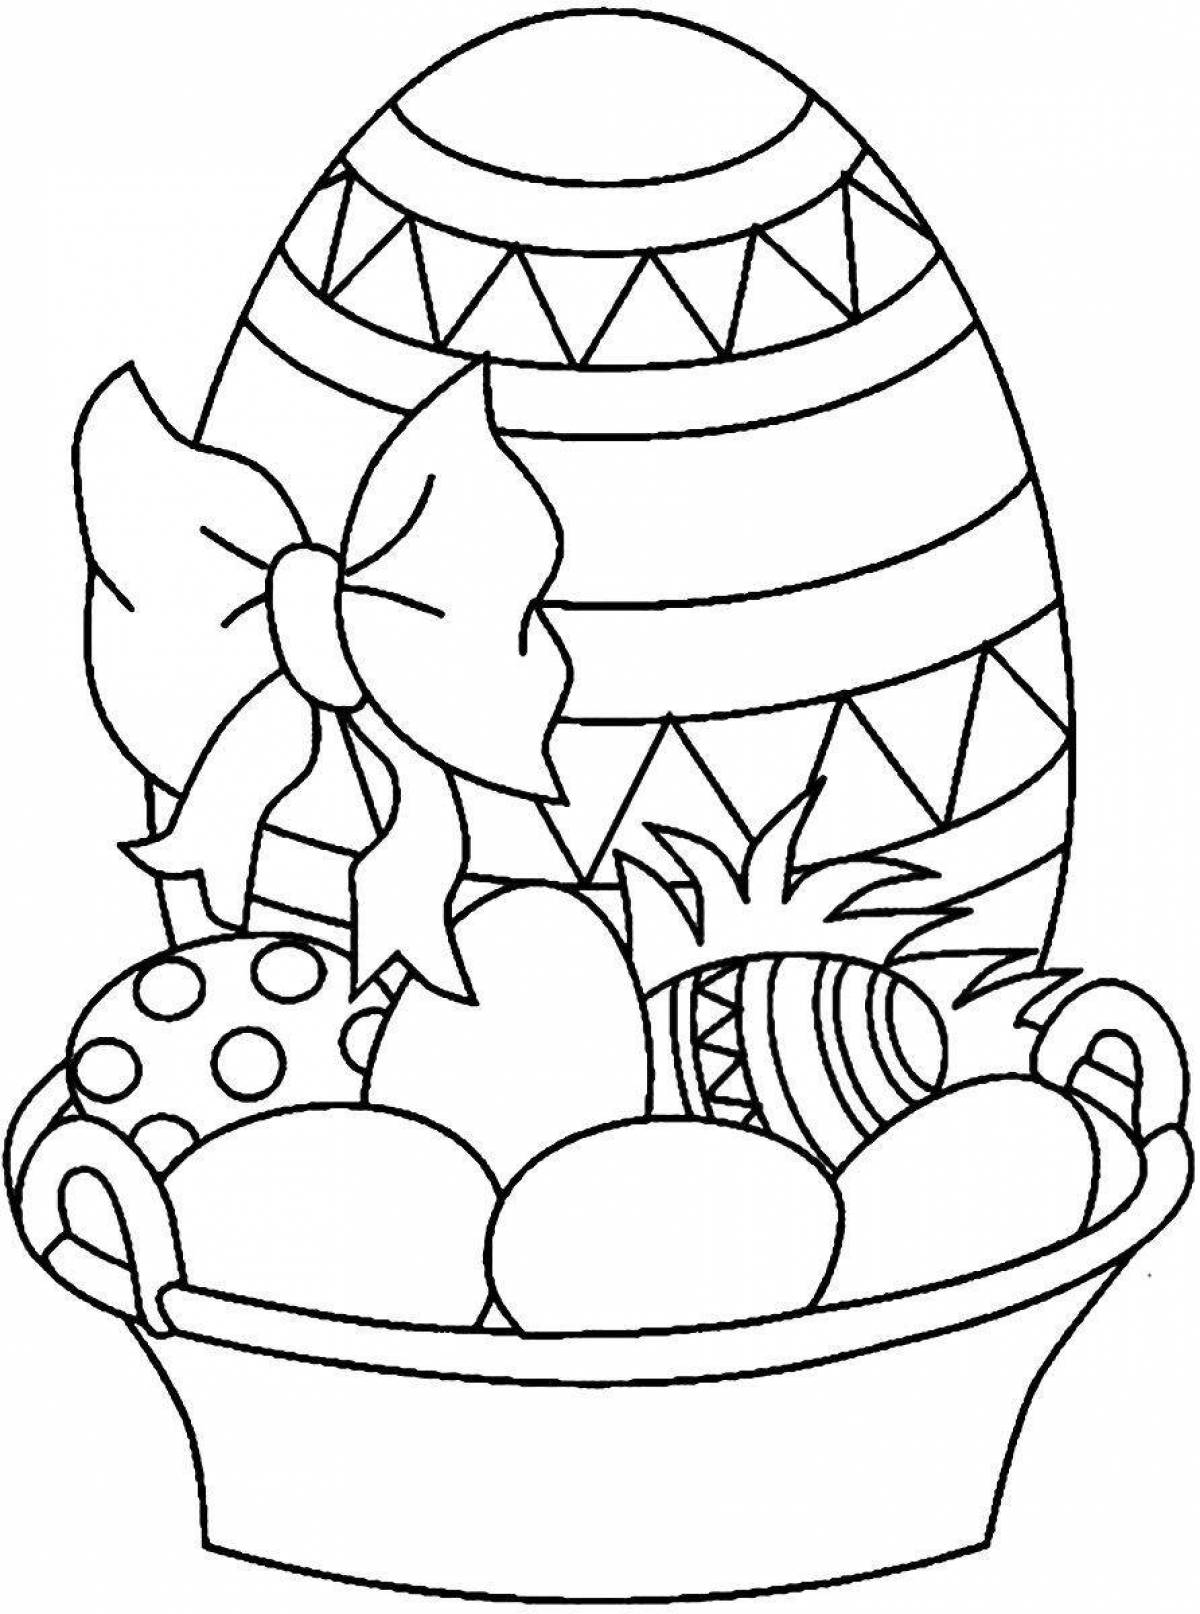 Coloring pages with Easter symbols